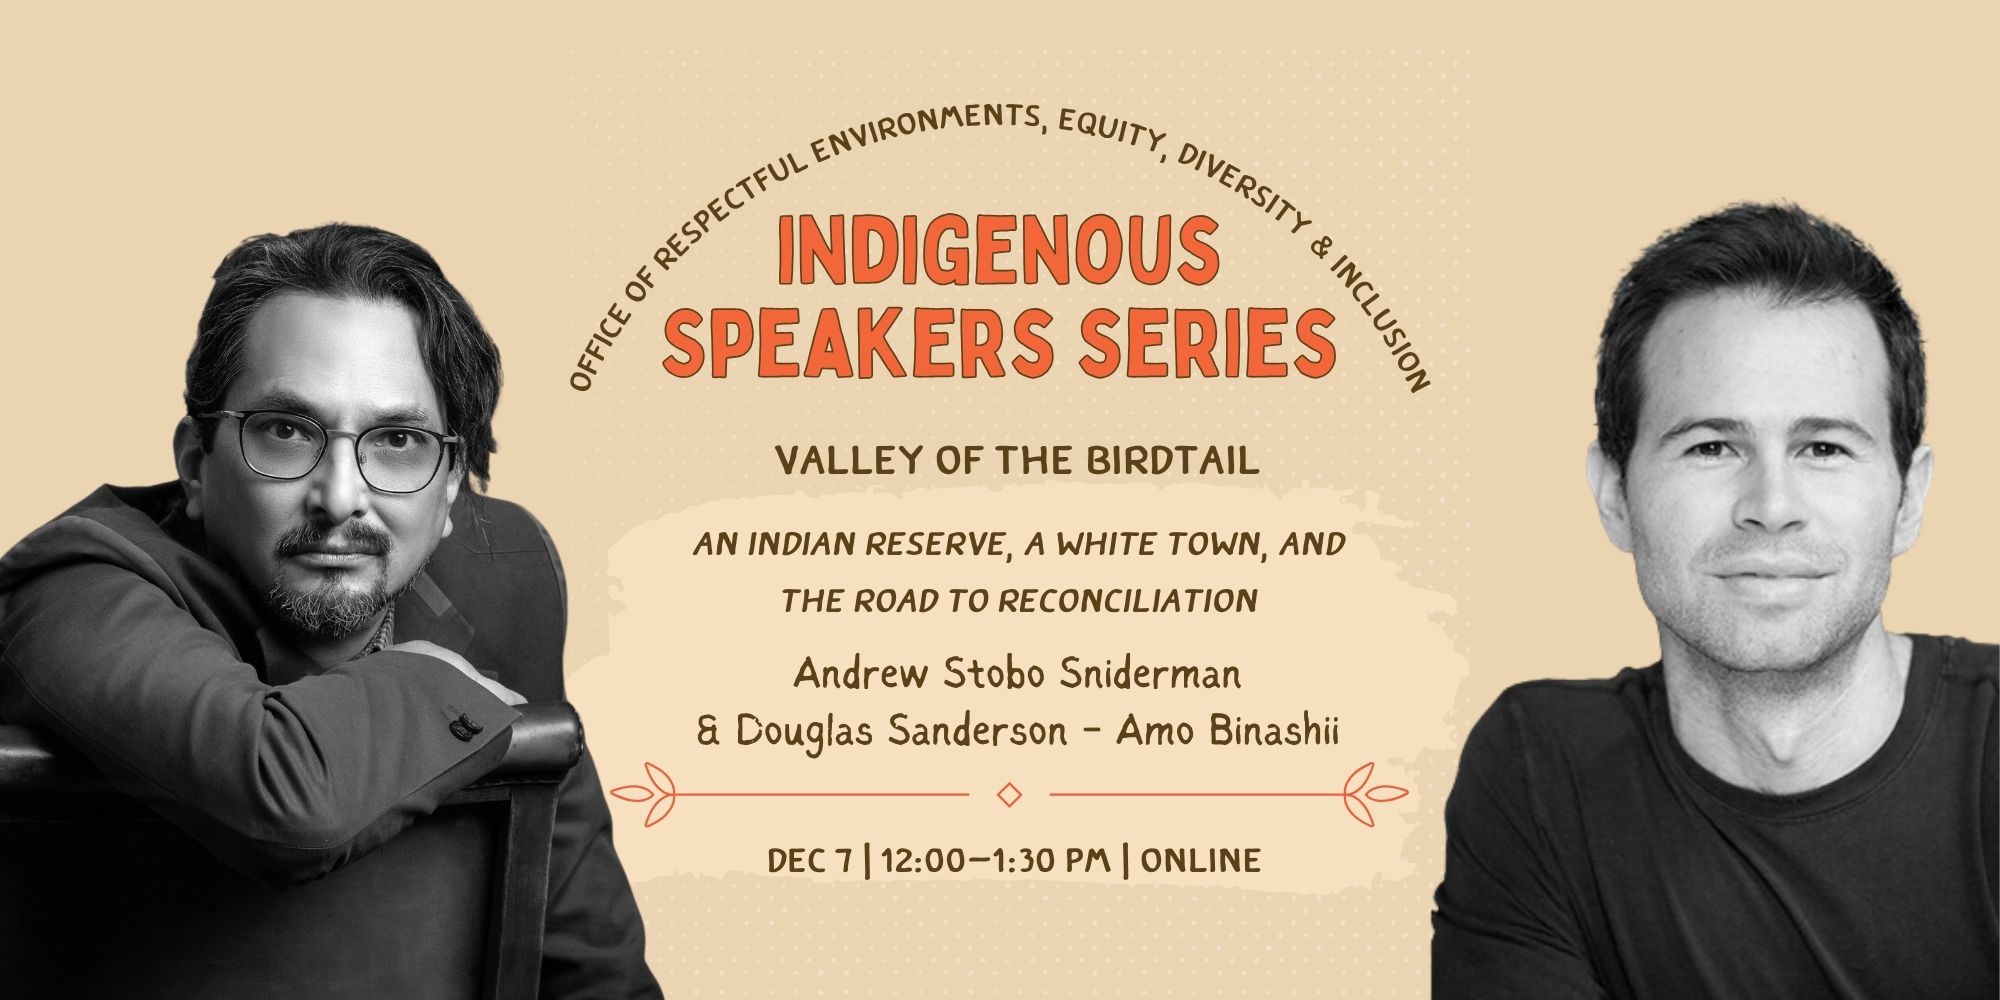 The Faculty of Medicine REDI Office Indigenous Speaker Series presents: “Valley of the Birdtail: An Indian Reserve, A White Town, and the Road to Reconciliation”